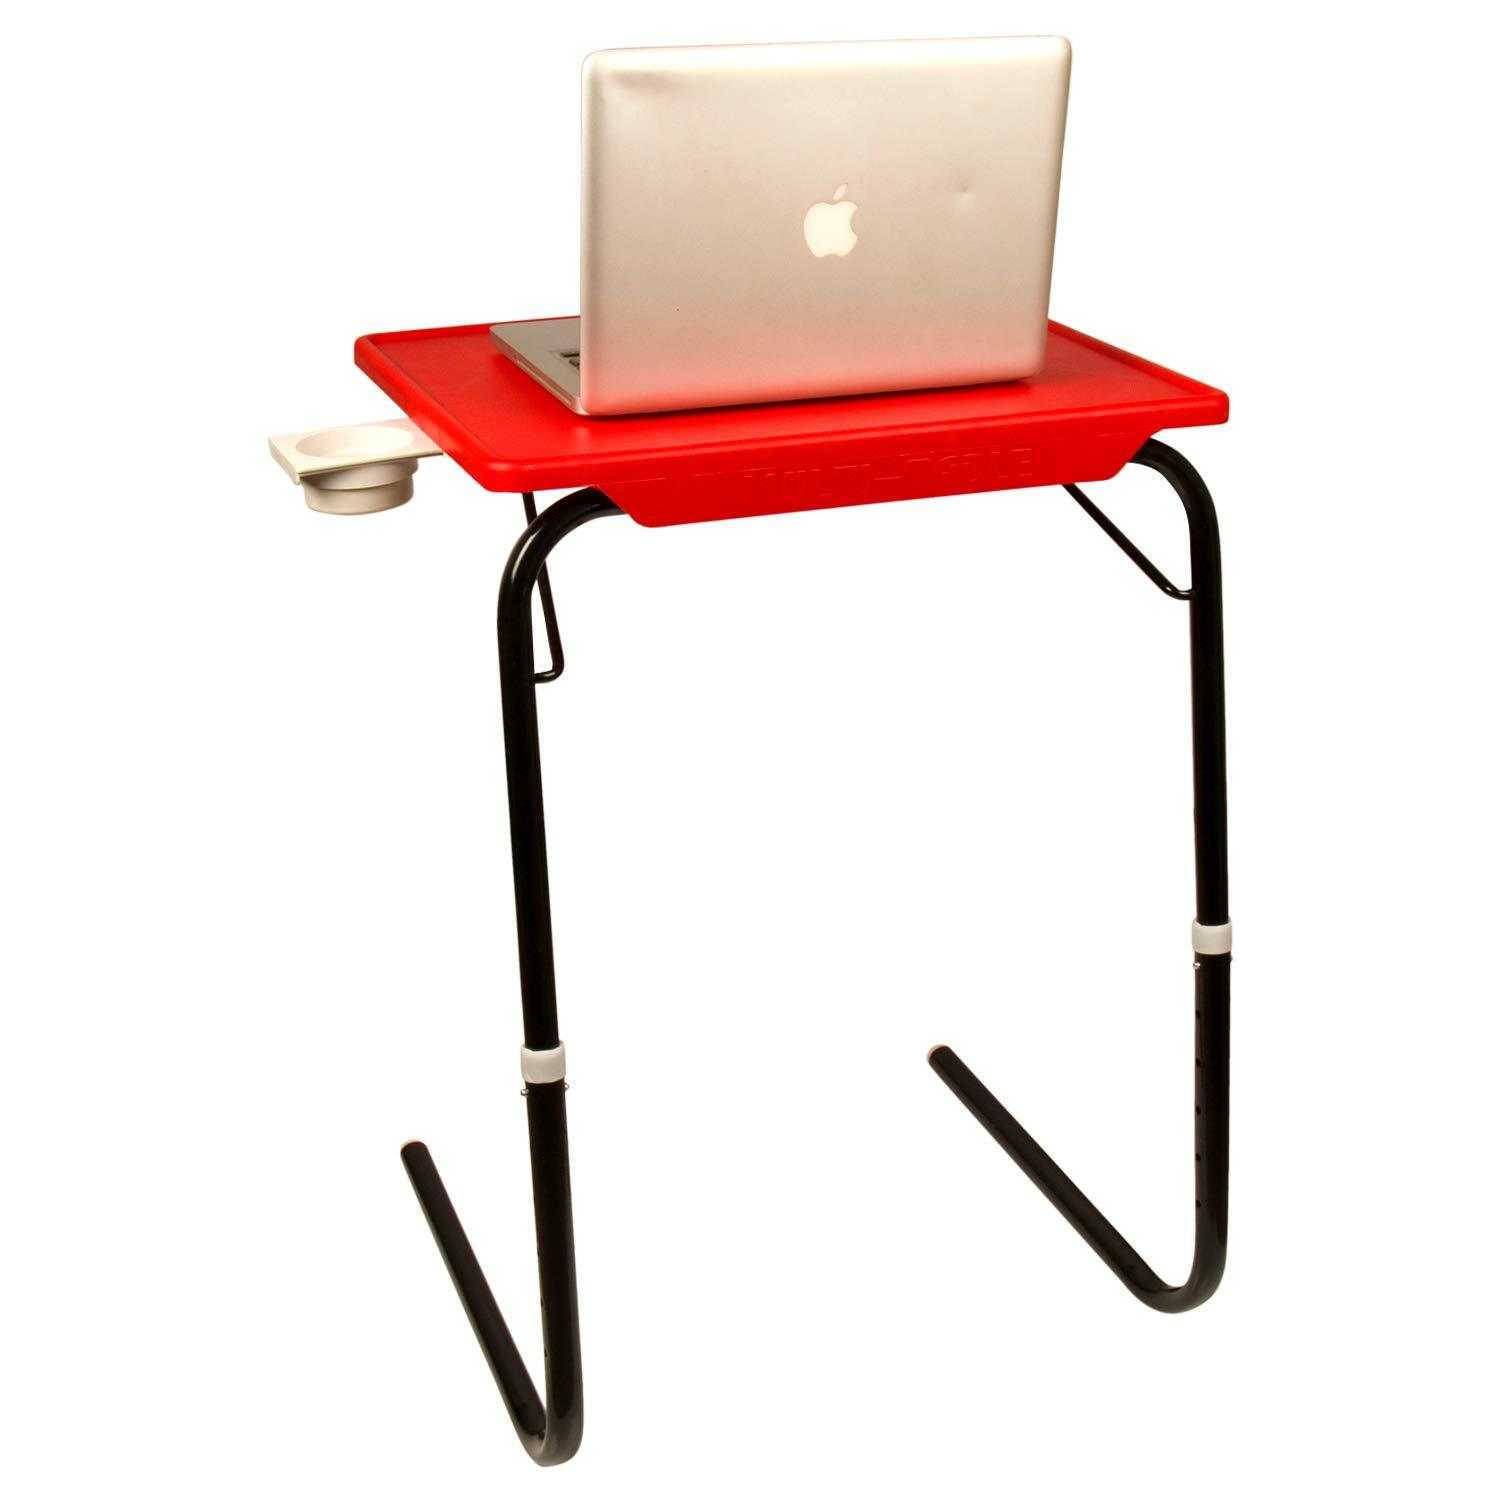 Laptop Tablemate with Black legs and red finishing | Wudore